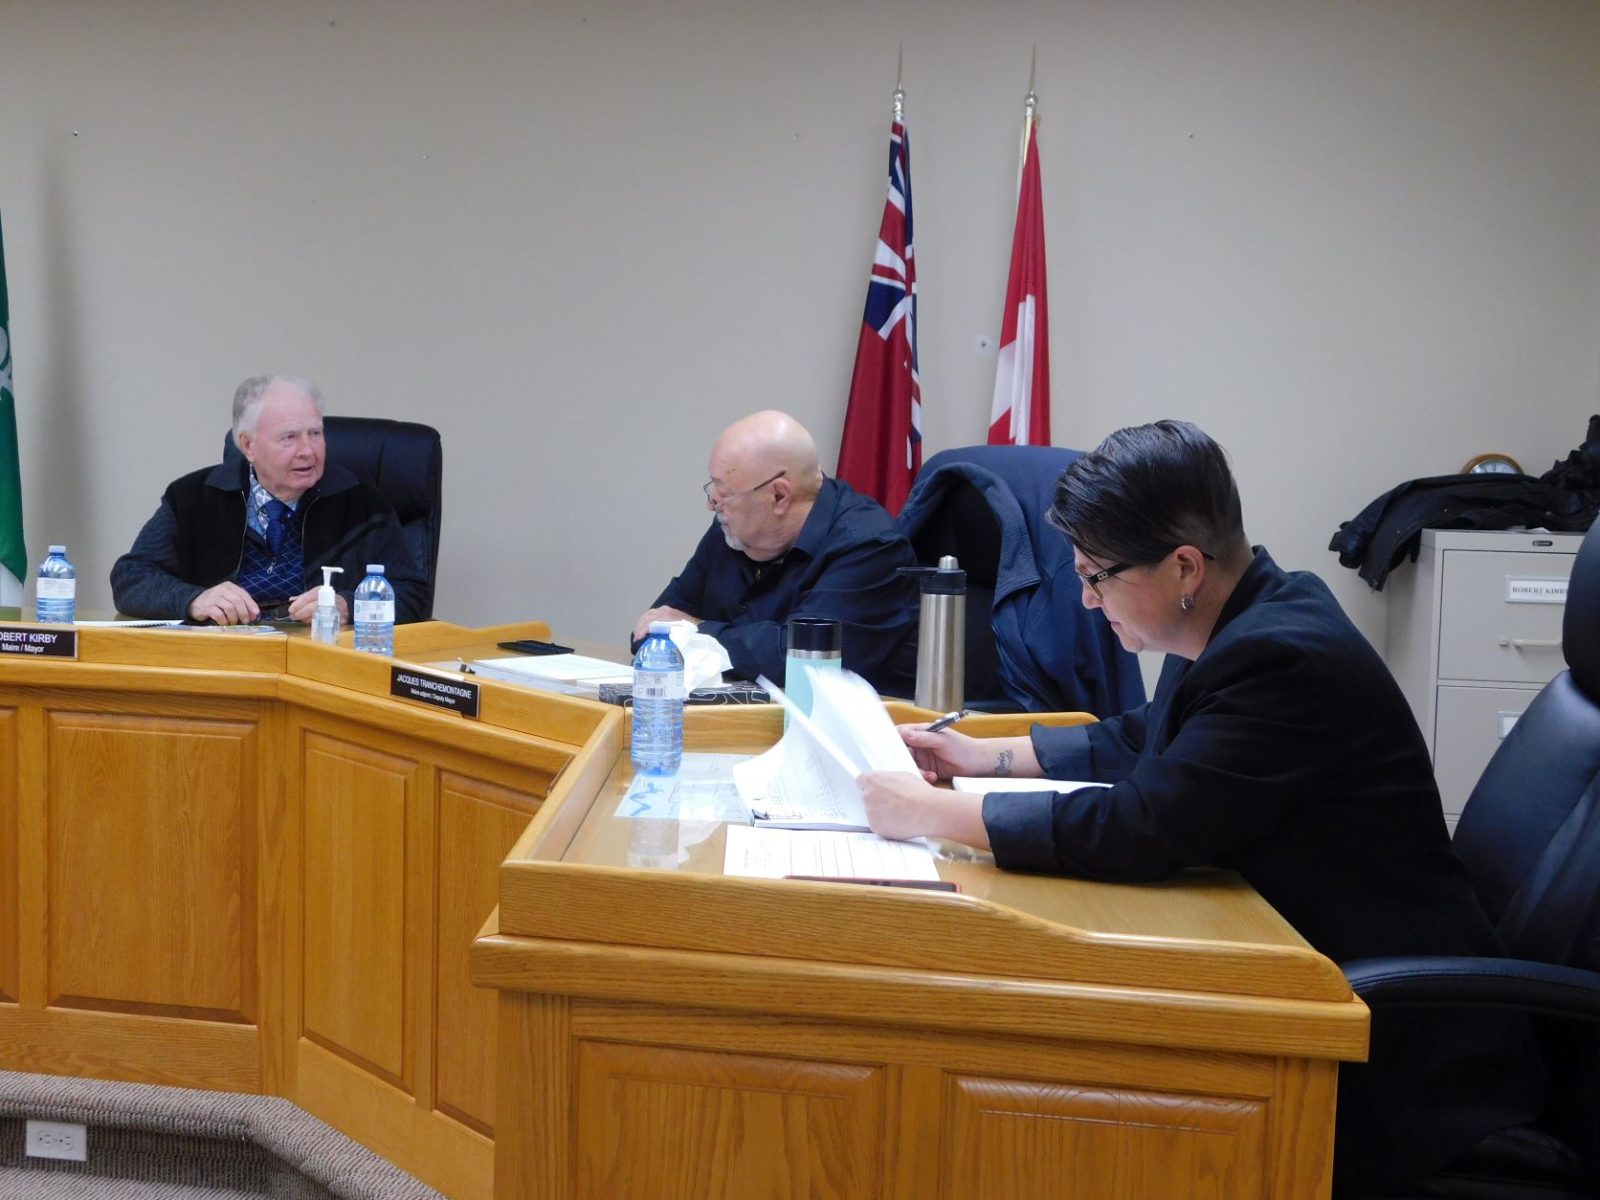 East Hawkesbury council faces budget challenge